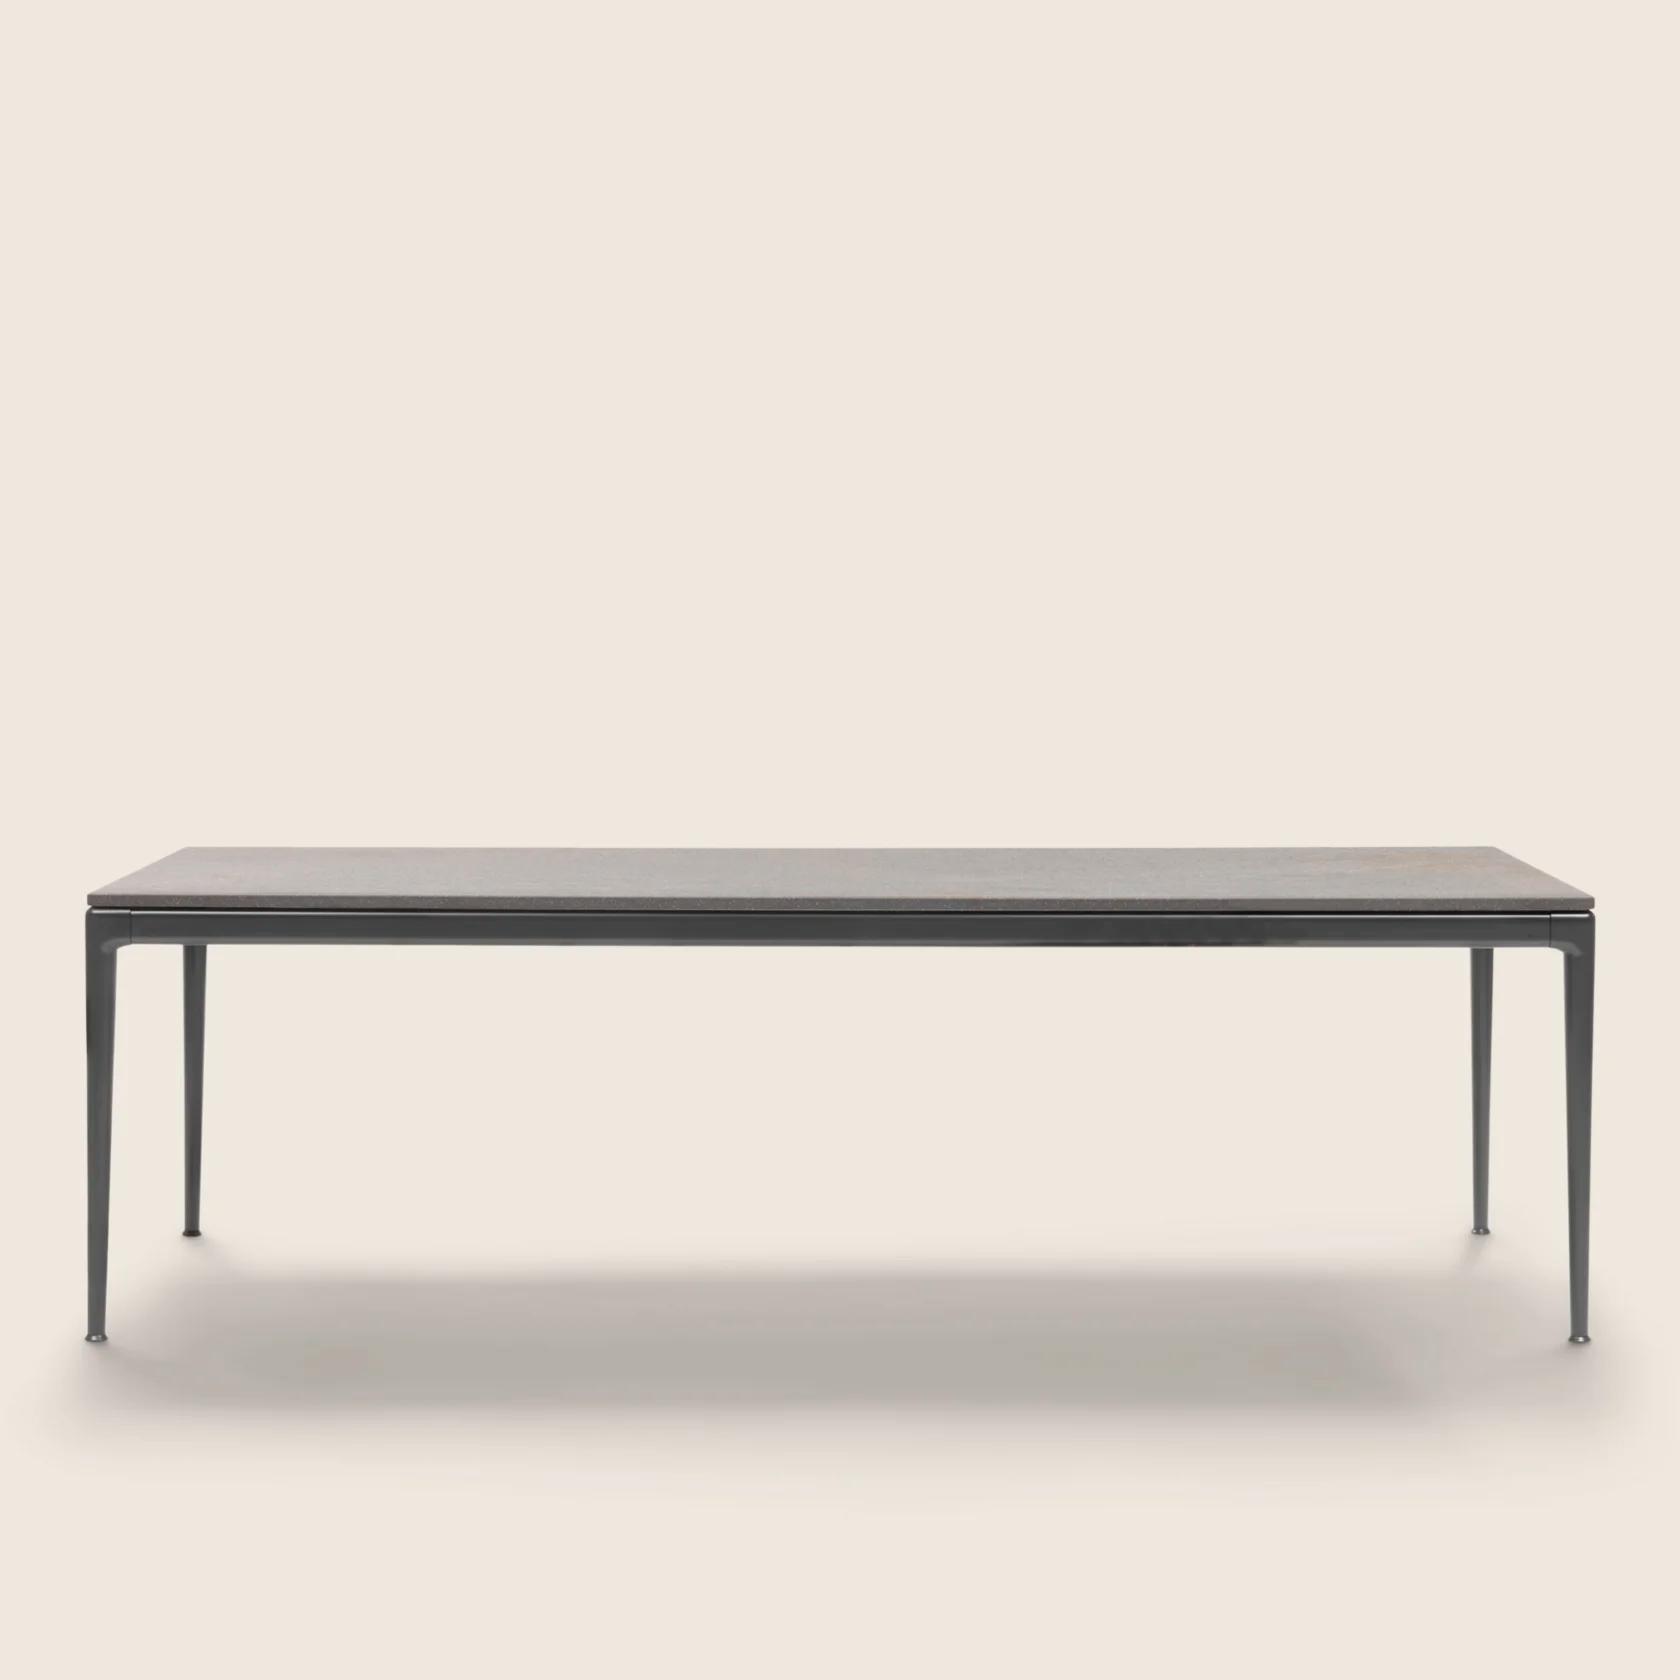 0283L0_PICO OUTDOOR_TABLE_01.png